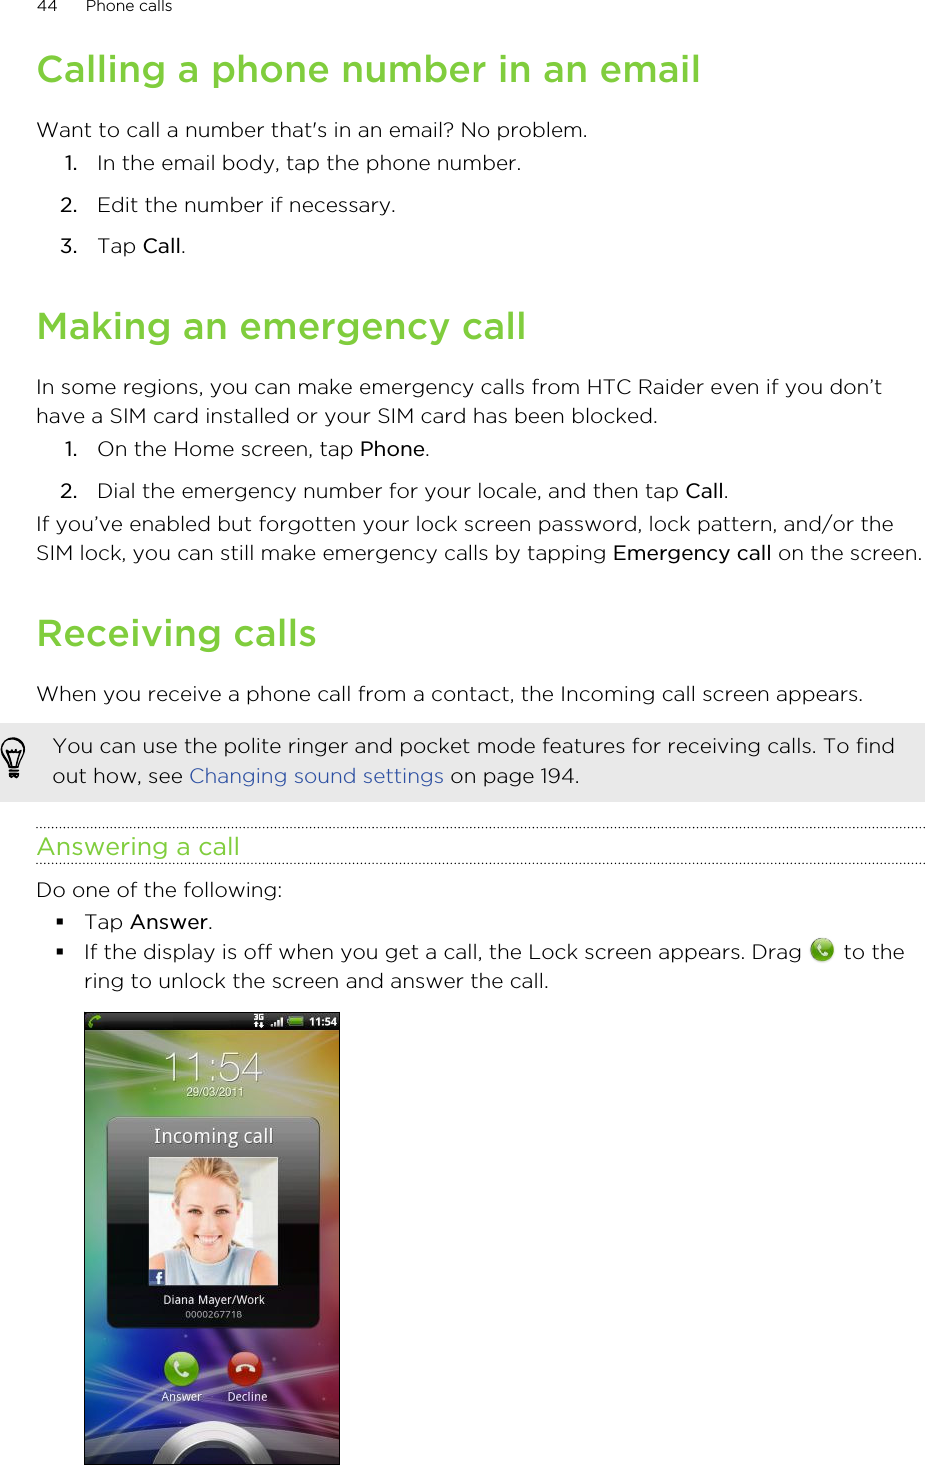 Calling a phone number in an emailWant to call a number that&apos;s in an email? No problem.1. In the email body, tap the phone number.2. Edit the number if necessary.3. Tap Call.Making an emergency callIn some regions, you can make emergency calls from HTC Raider even if you don’thave a SIM card installed or your SIM card has been blocked.1. On the Home screen, tap Phone.2. Dial the emergency number for your locale, and then tap Call.If you’ve enabled but forgotten your lock screen password, lock pattern, and/or theSIM lock, you can still make emergency calls by tapping Emergency call on the screen.Receiving callsWhen you receive a phone call from a contact, the Incoming call screen appears.You can use the polite ringer and pocket mode features for receiving calls. To findout how, see Changing sound settings on page 194.Answering a callDo one of the following:§Tap Answer.§If the display is off when you get a call, the Lock screen appears. Drag   to thering to unlock the screen and answer the call.44 Phone calls